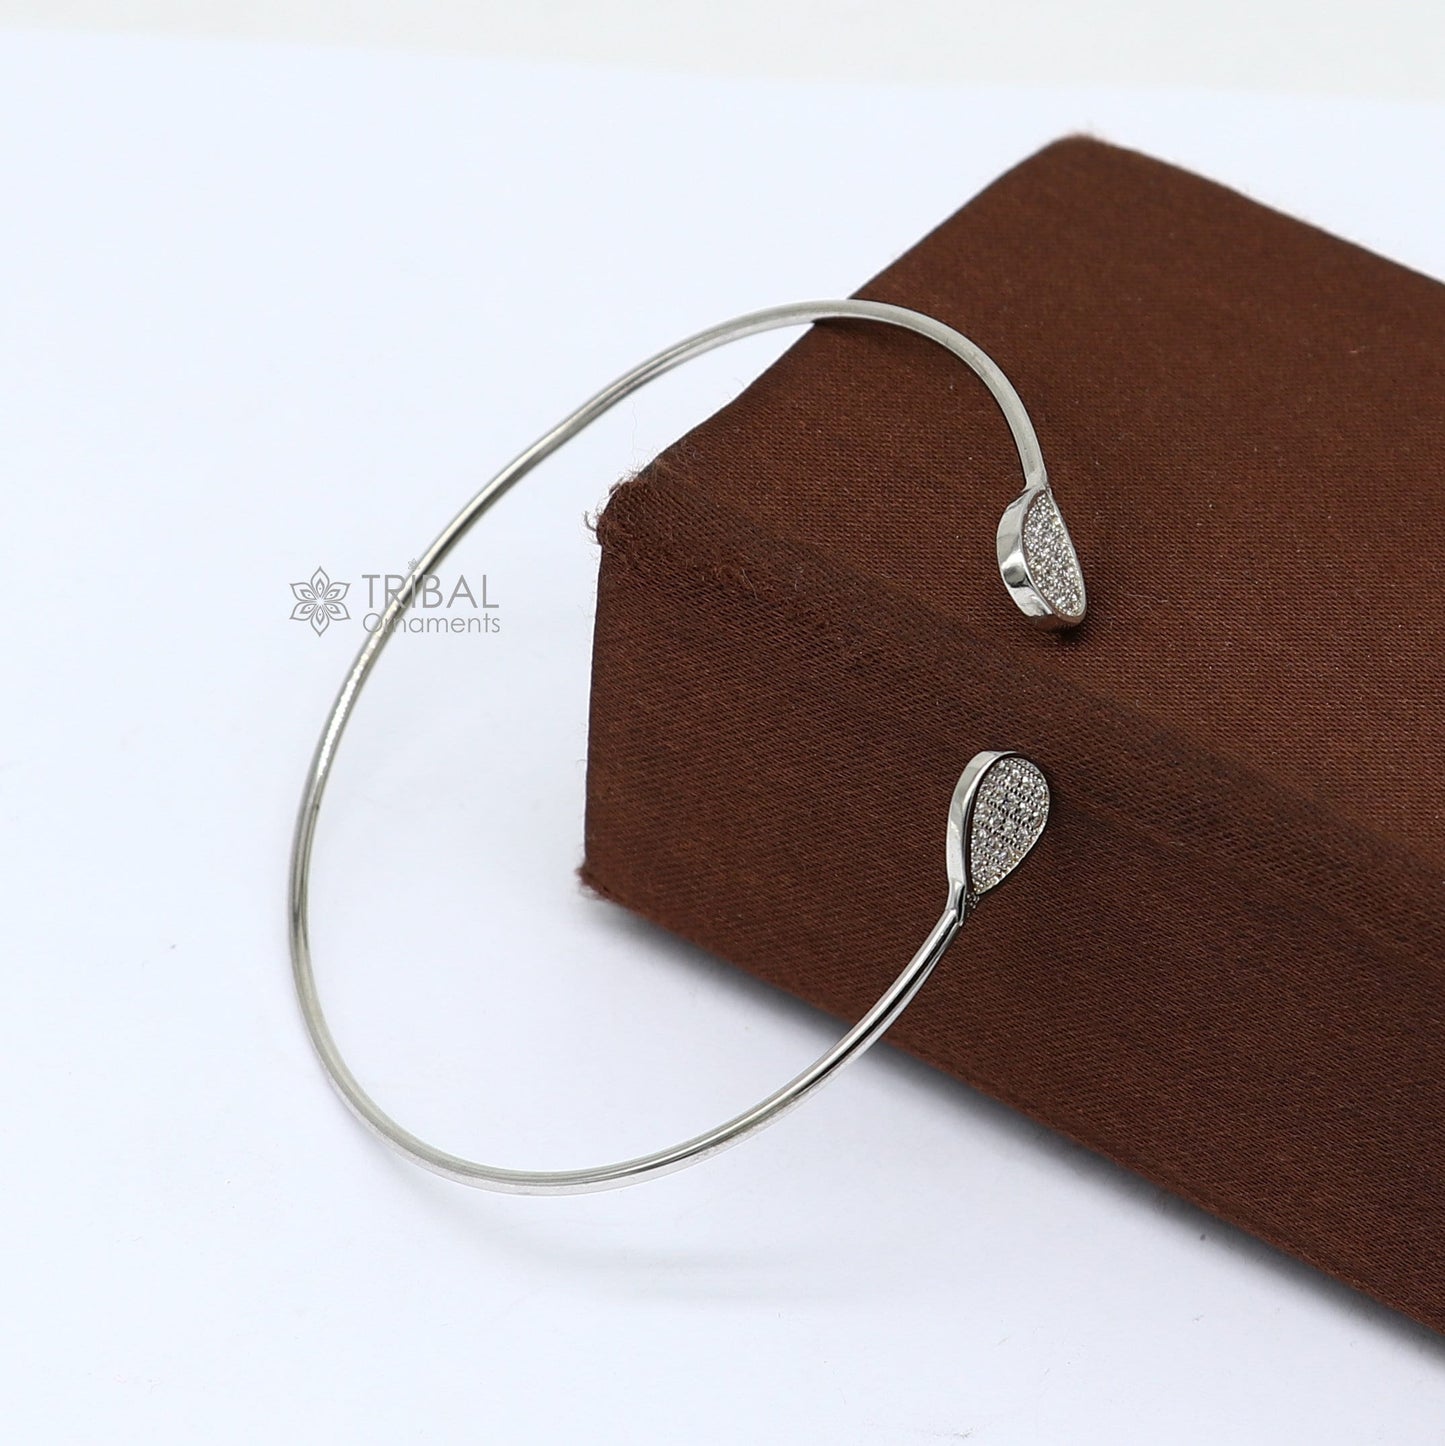 925 sterling silver handmade amazing trendy stylish girl's cuff kada bracelet, best delicate unique light weight gifting for girls cuff172 - TRIBAL ORNAMENTS